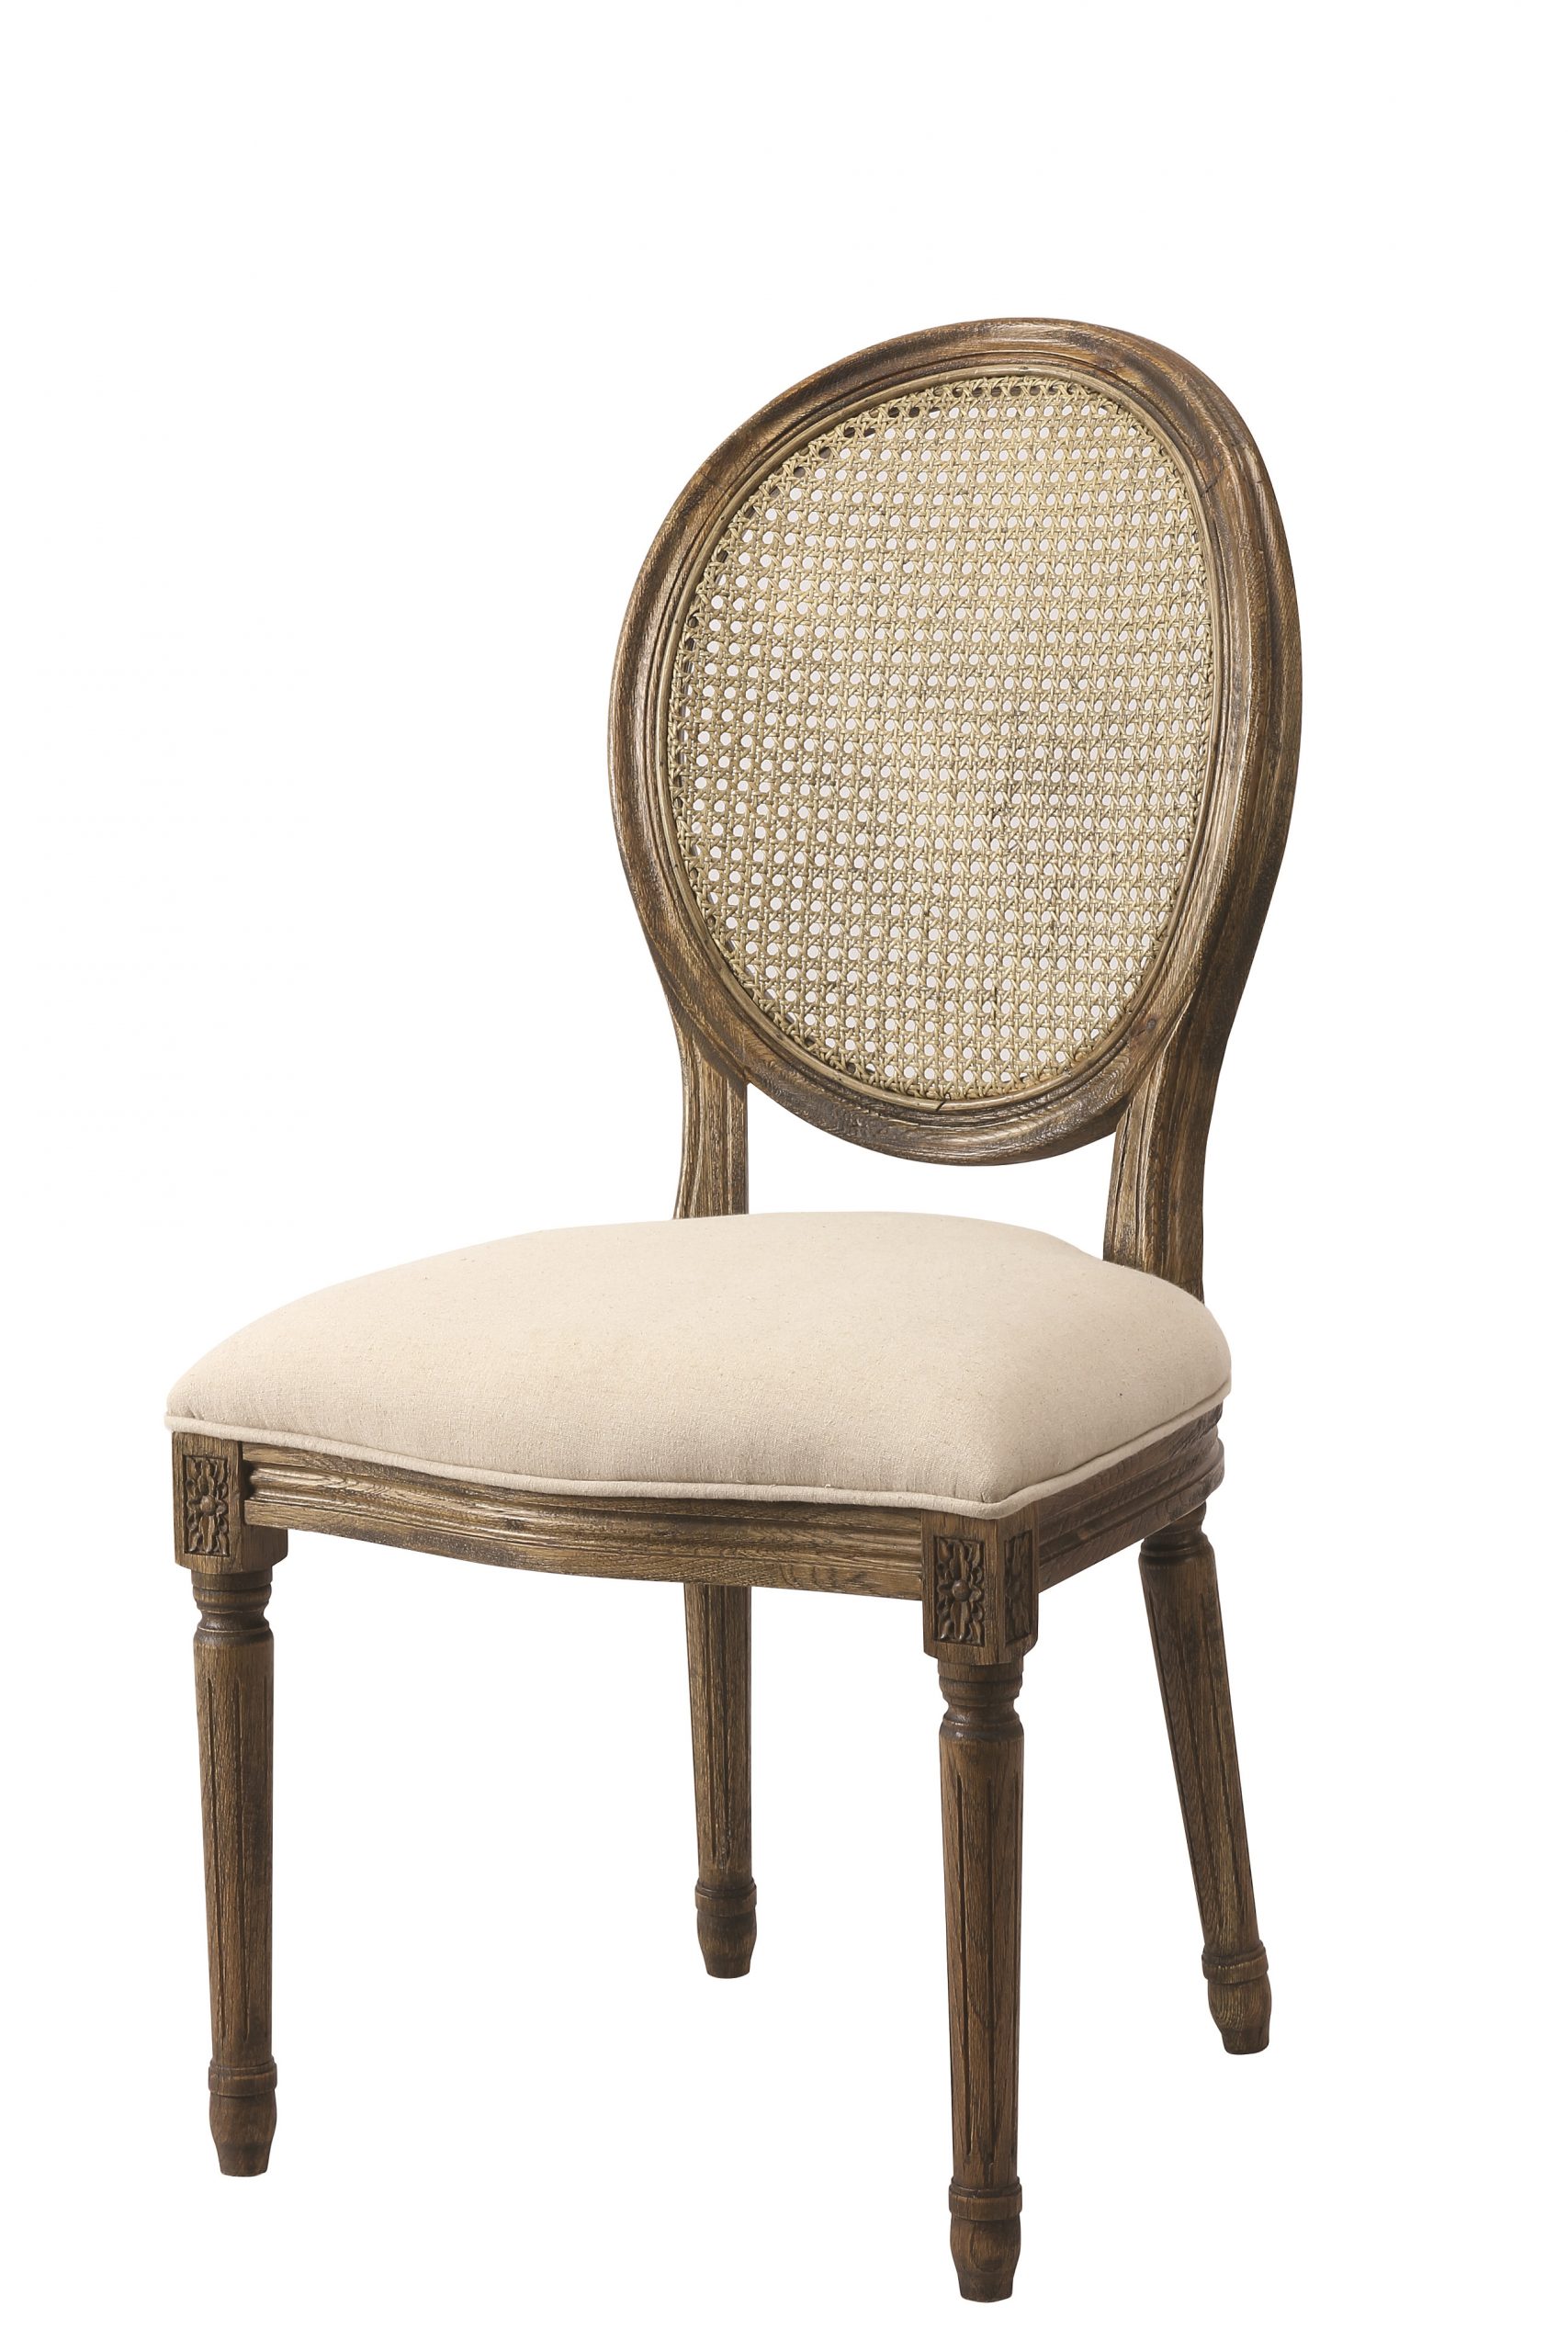 Louis Cane Back Dining Chair  The Party Rentals Resource Company